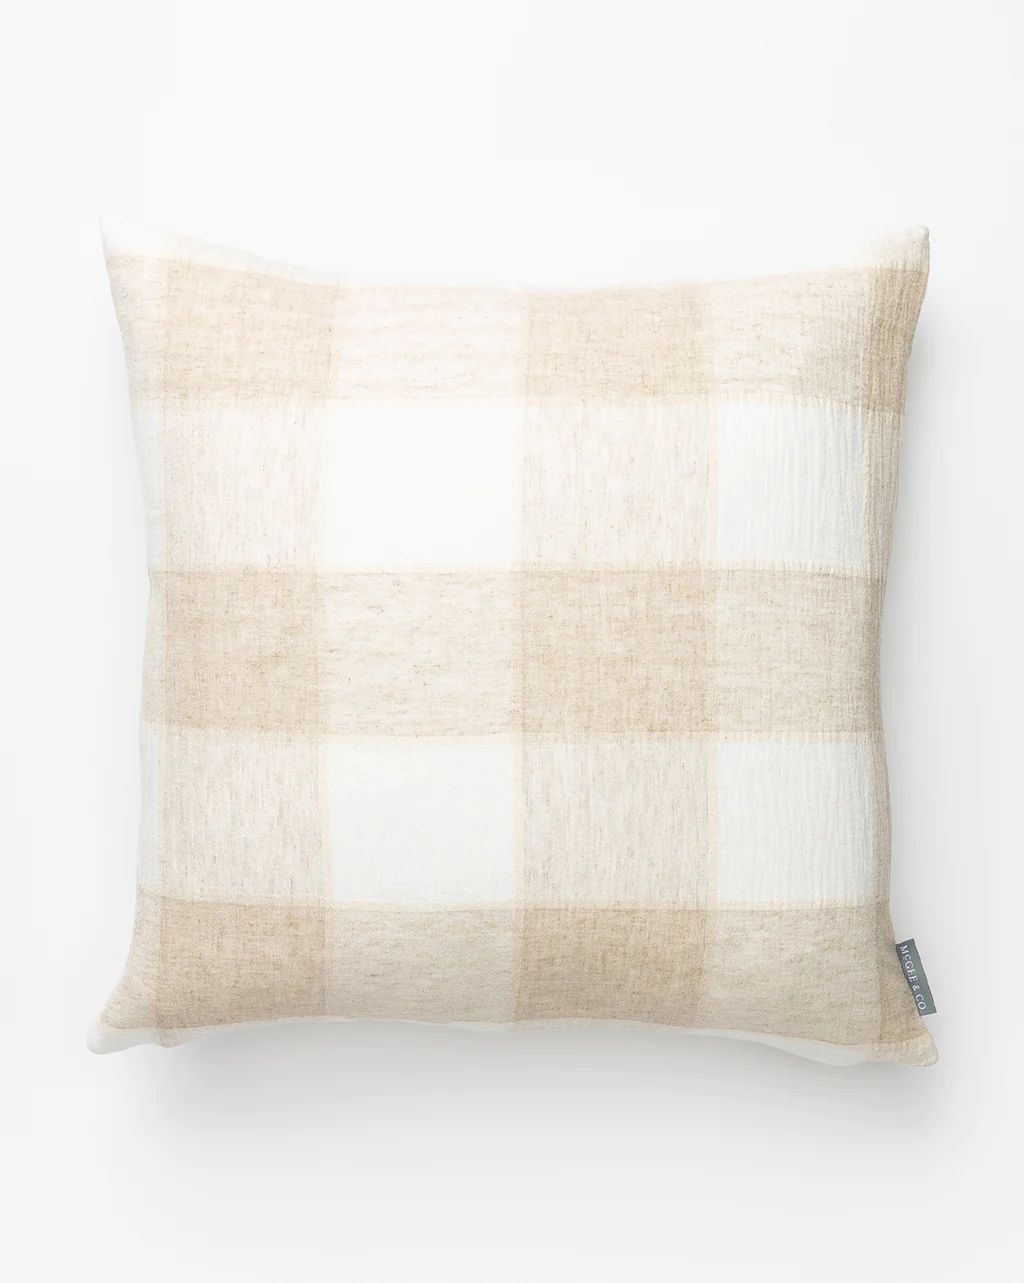 Vintage Natural Plaid Pillow Cover No. 4 | McGee & Co.